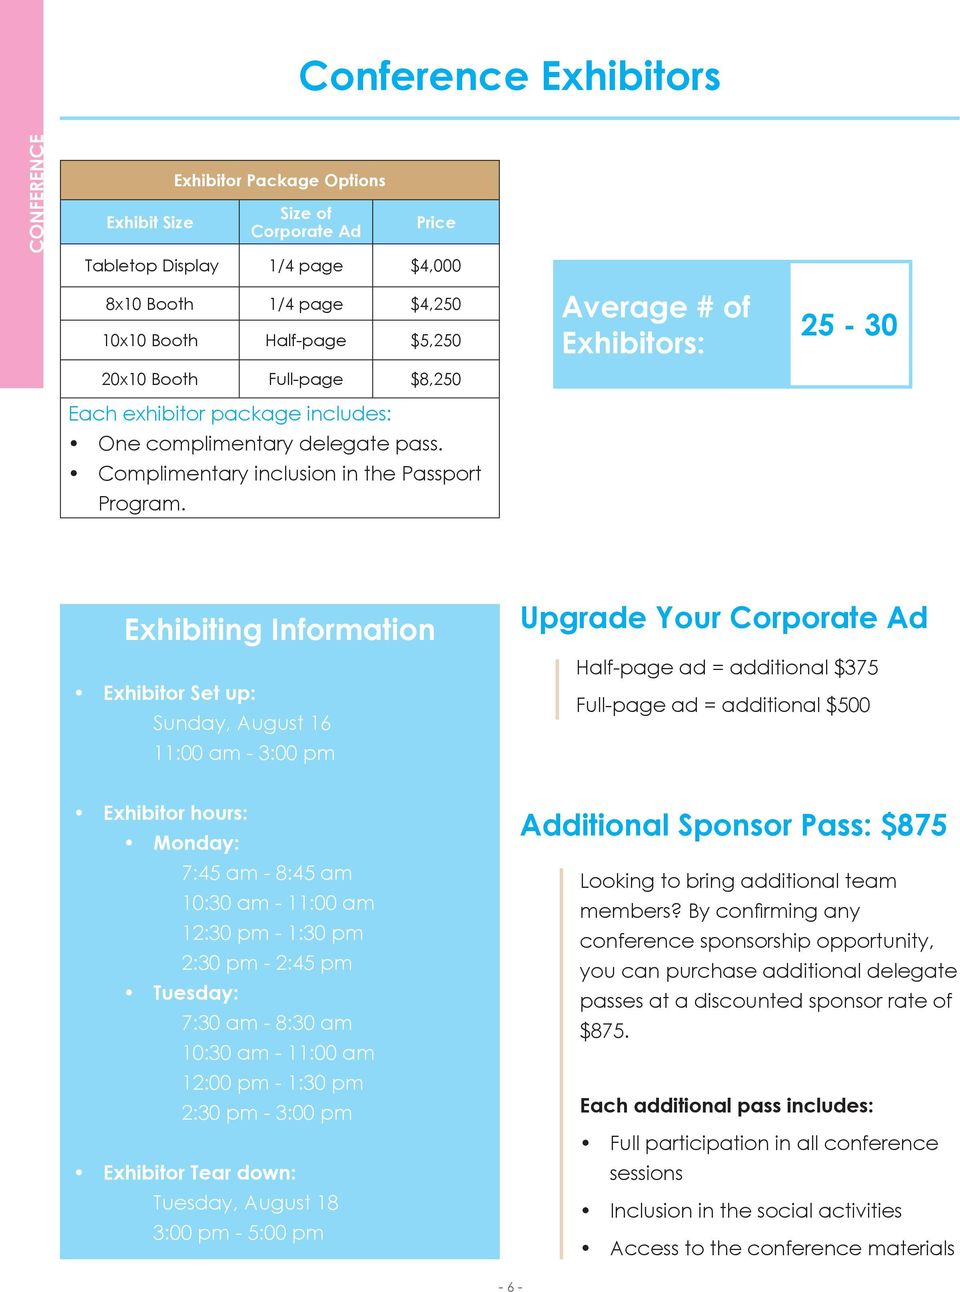 Exhibiting Information Exhibitor Set up: Sunday, August 16 11:00 am - 3:00 pm Upgrade Your Corporate Ad Half-page ad = additional $375 Full-page ad = additional $500 Exhibitor hours: Monday: Tuesday: